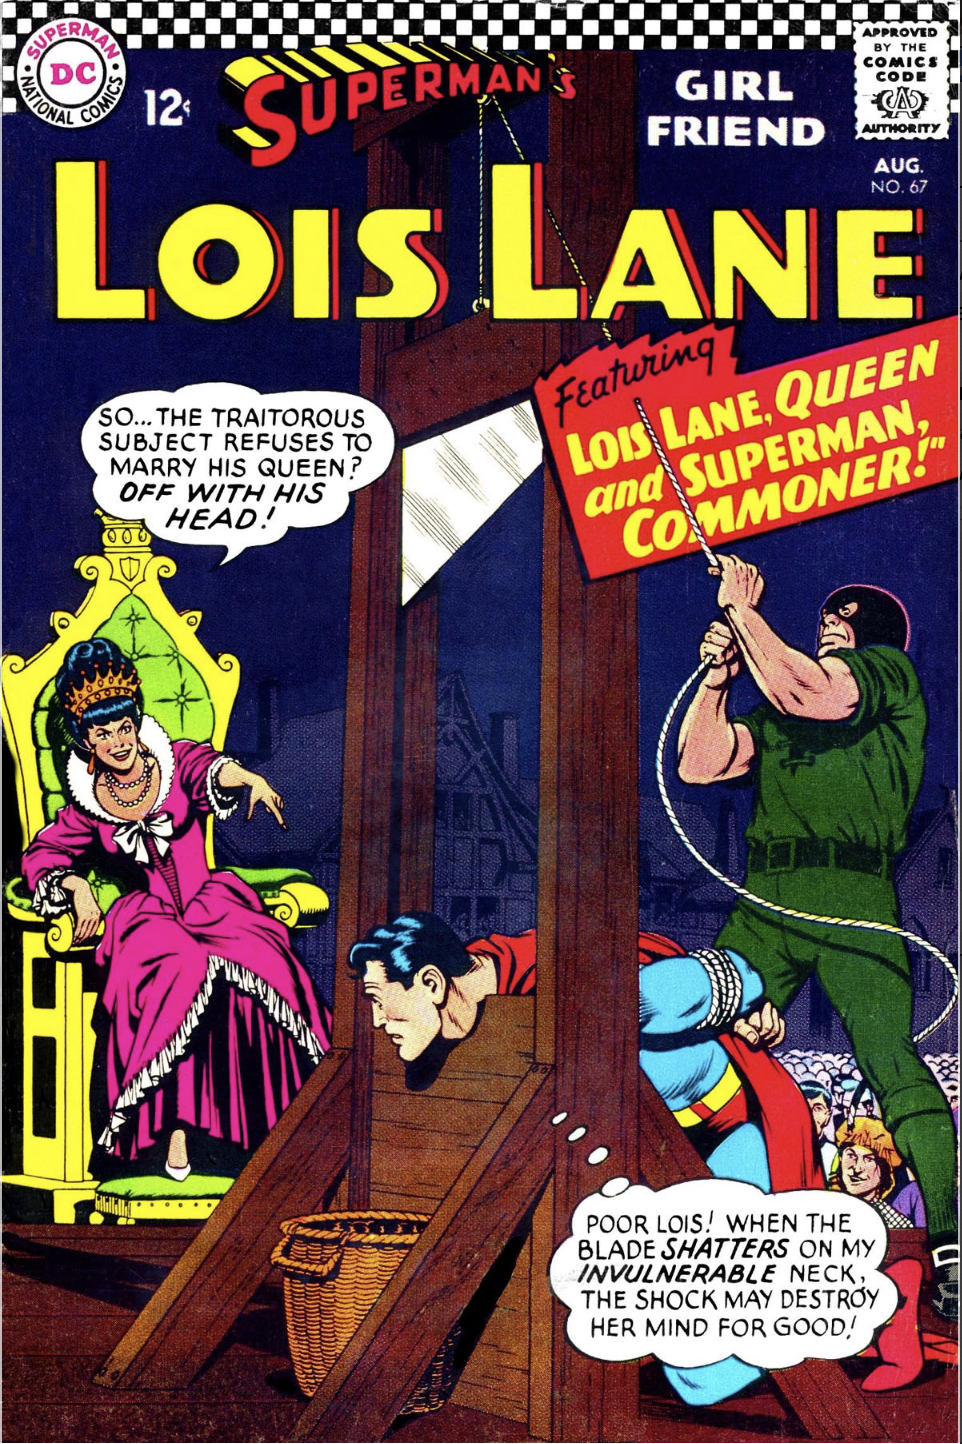 Queens for a Day! (Lois Lane 67)